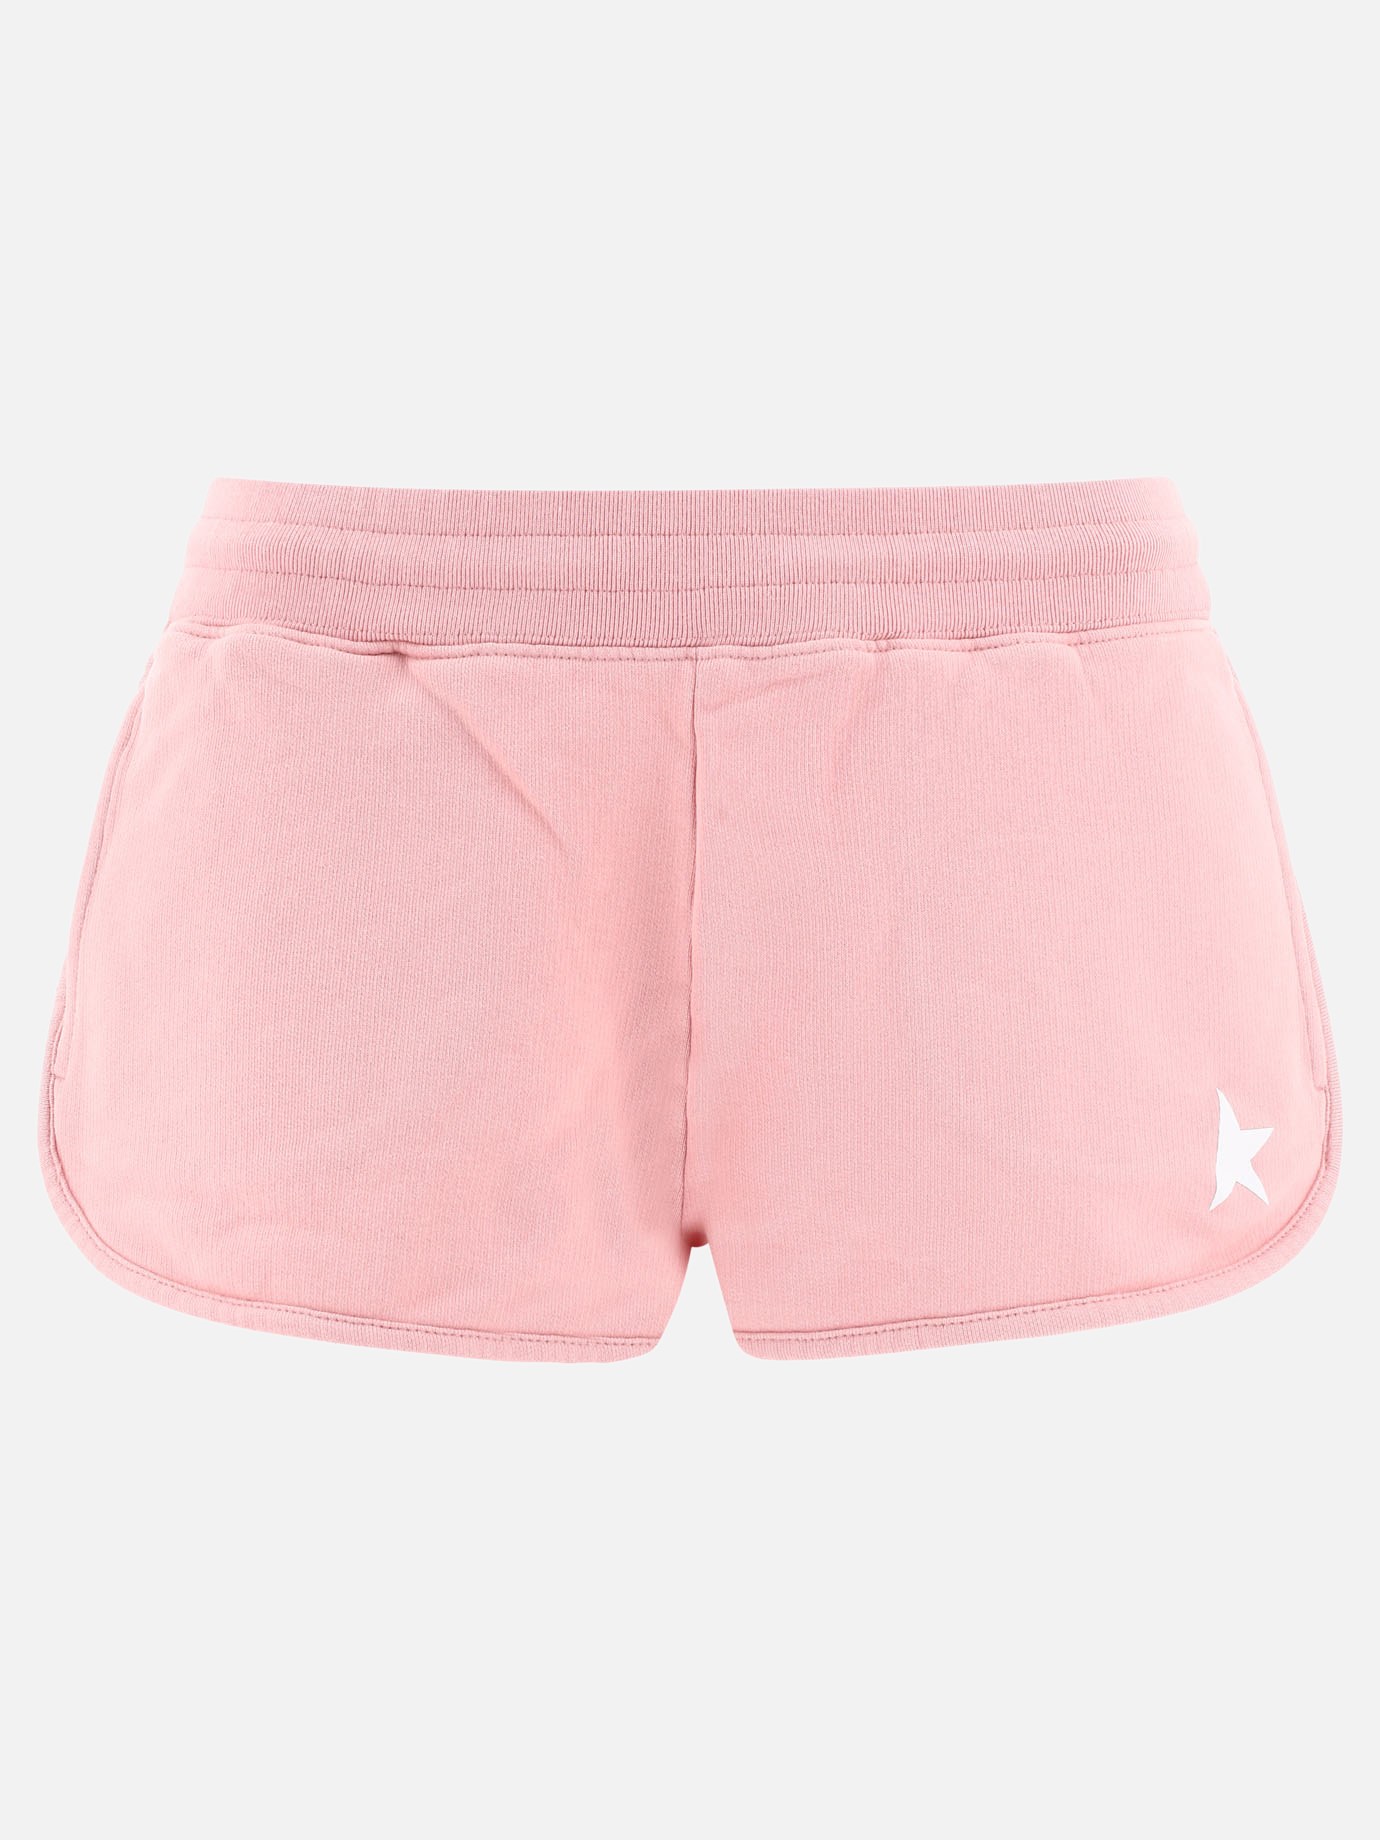  Diana  shorts by Golden Goose